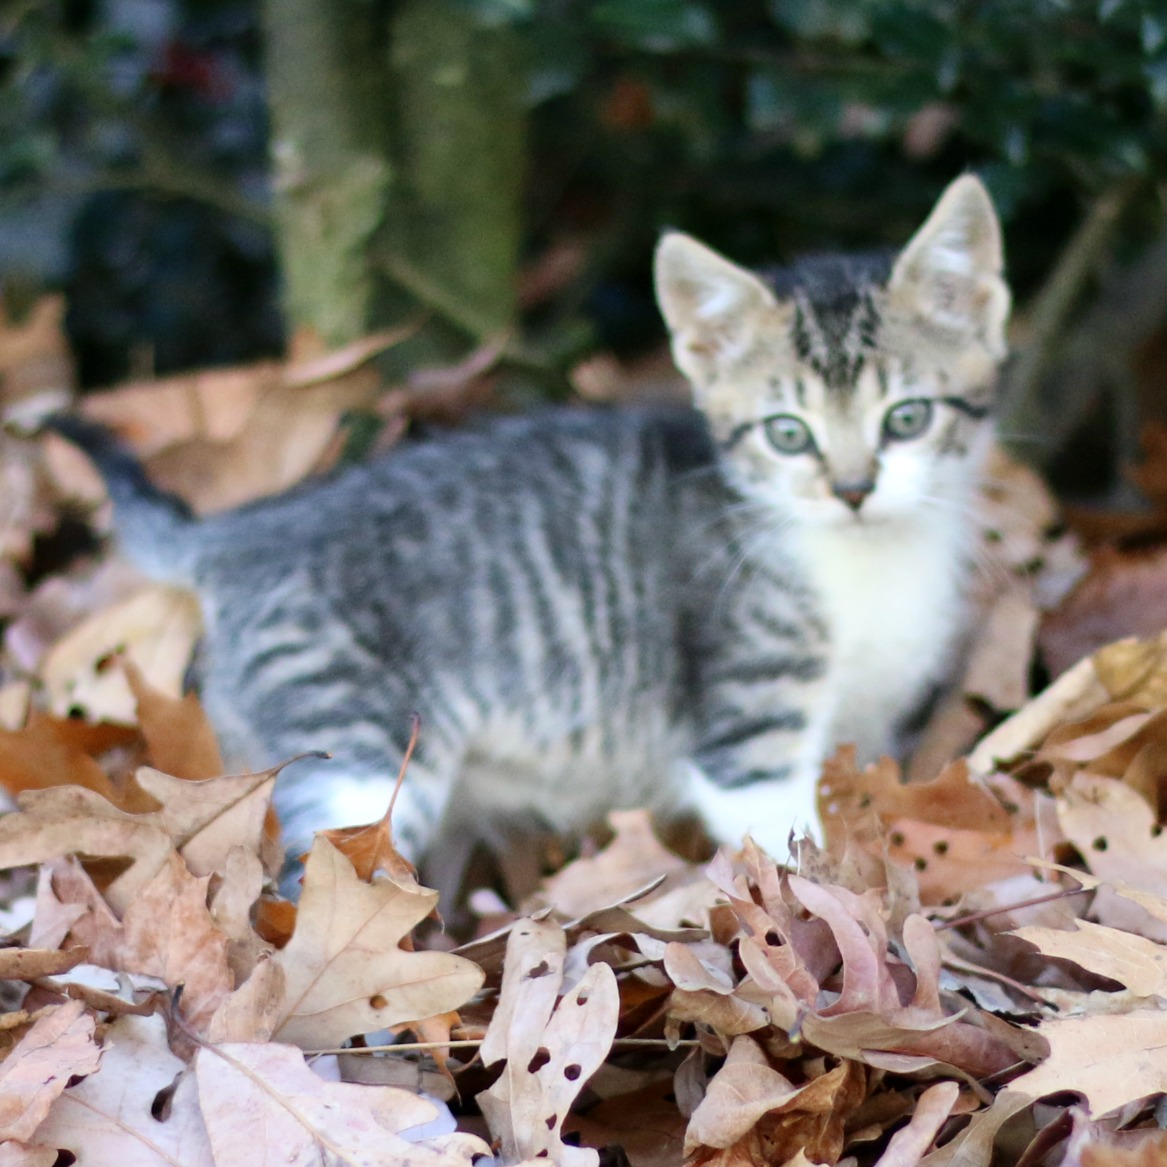 Image of a small cat standing in dry leaves